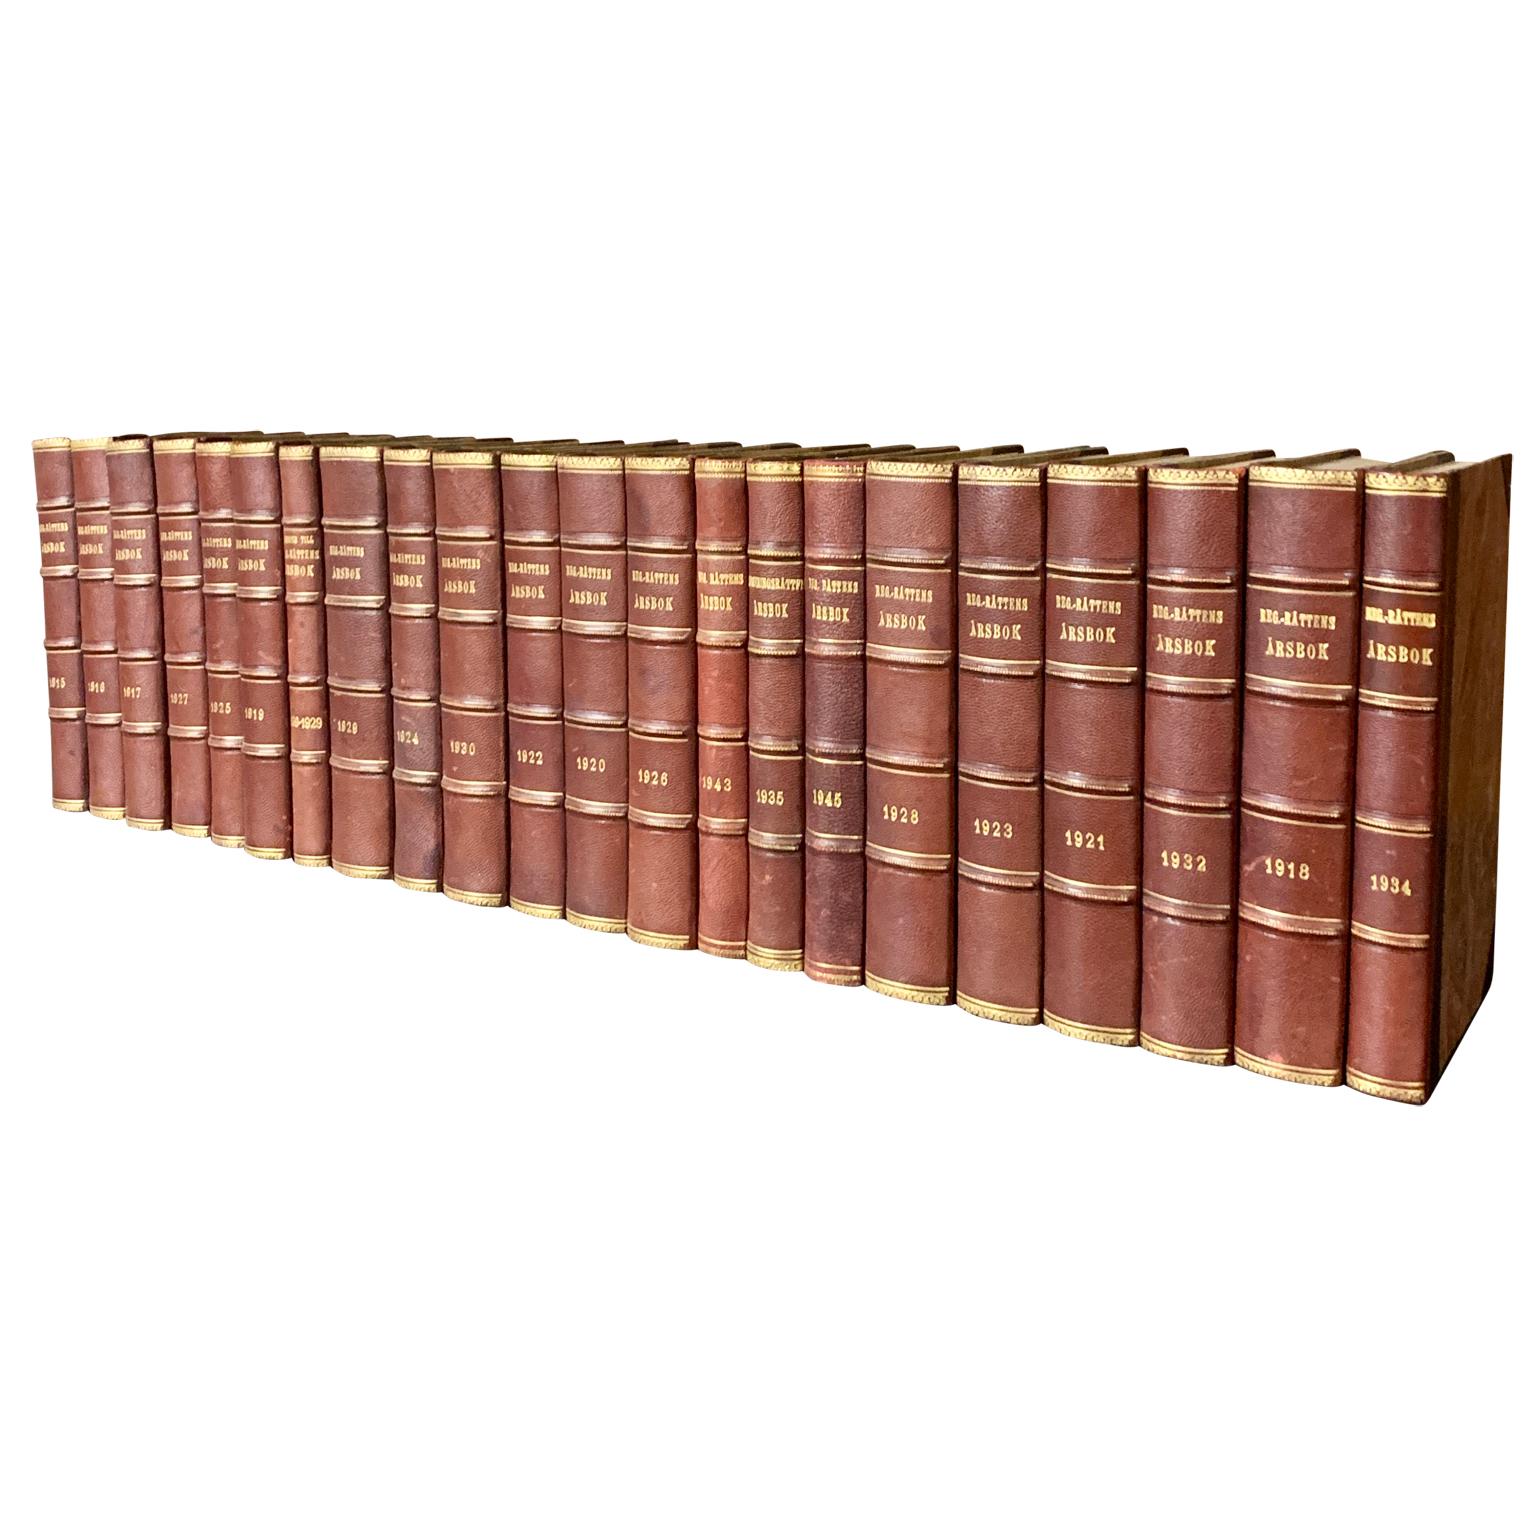 A collection of 22 Swedish decorative antique leather-bound library books.
The books are wrapped in leather-bound covers, comprised of a selection of warm tones and gold leaf print embossing.
The book collection measure horizontally is 80 cm,